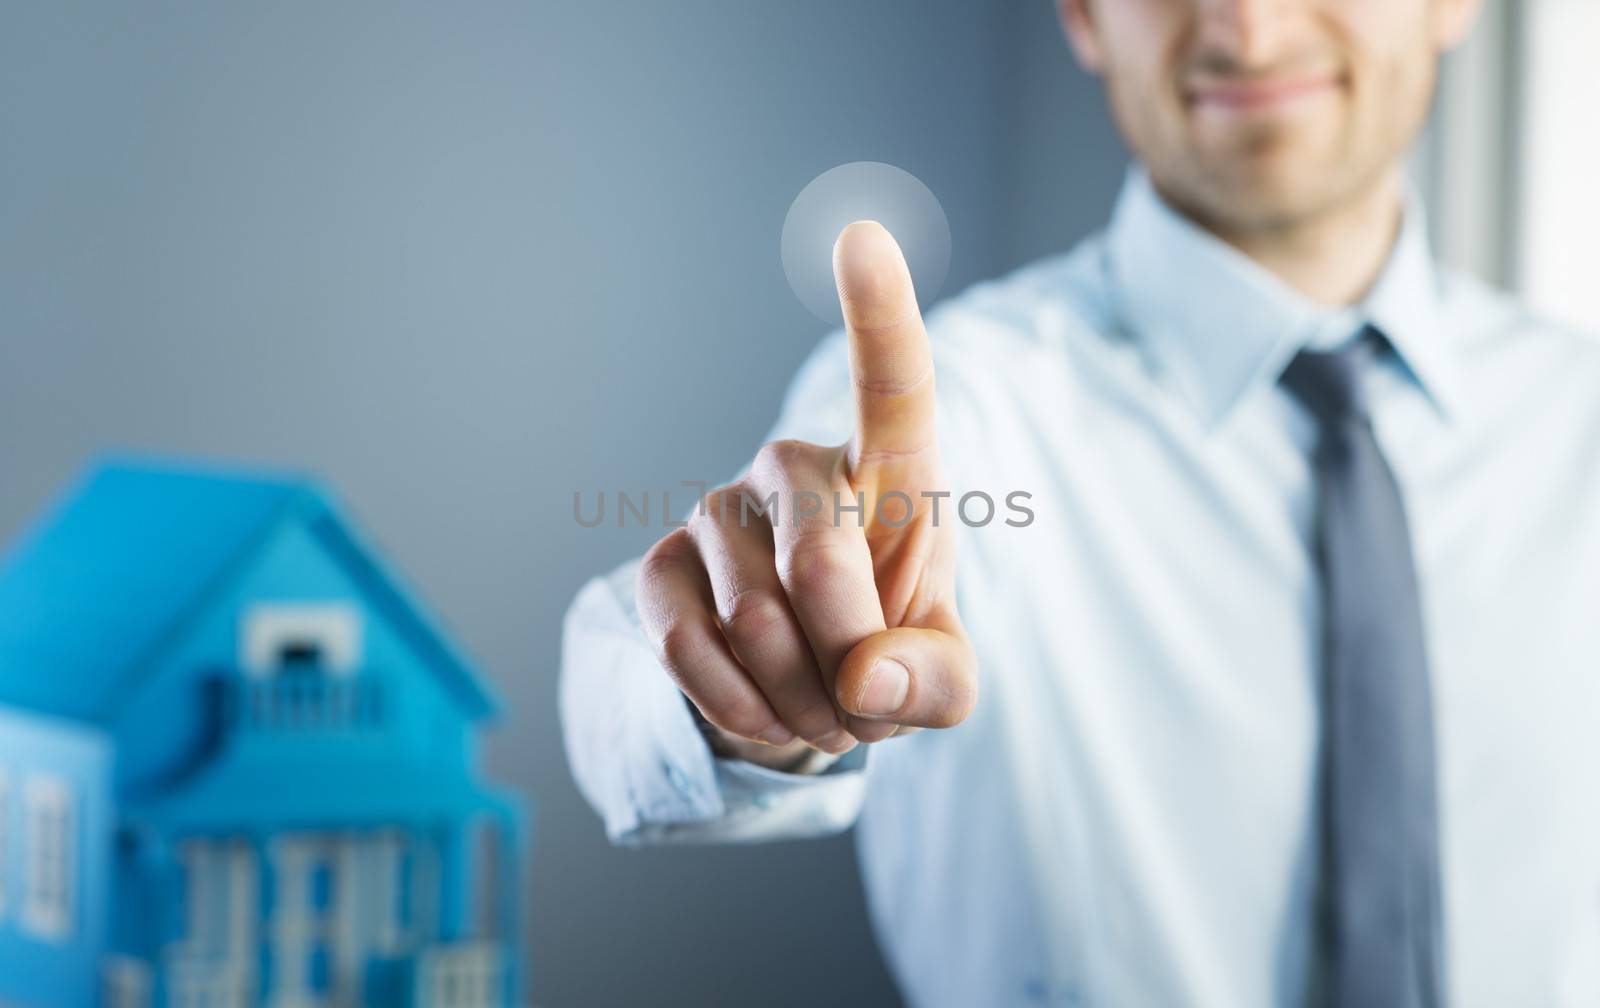 Man using touch screen interface with model house on background.